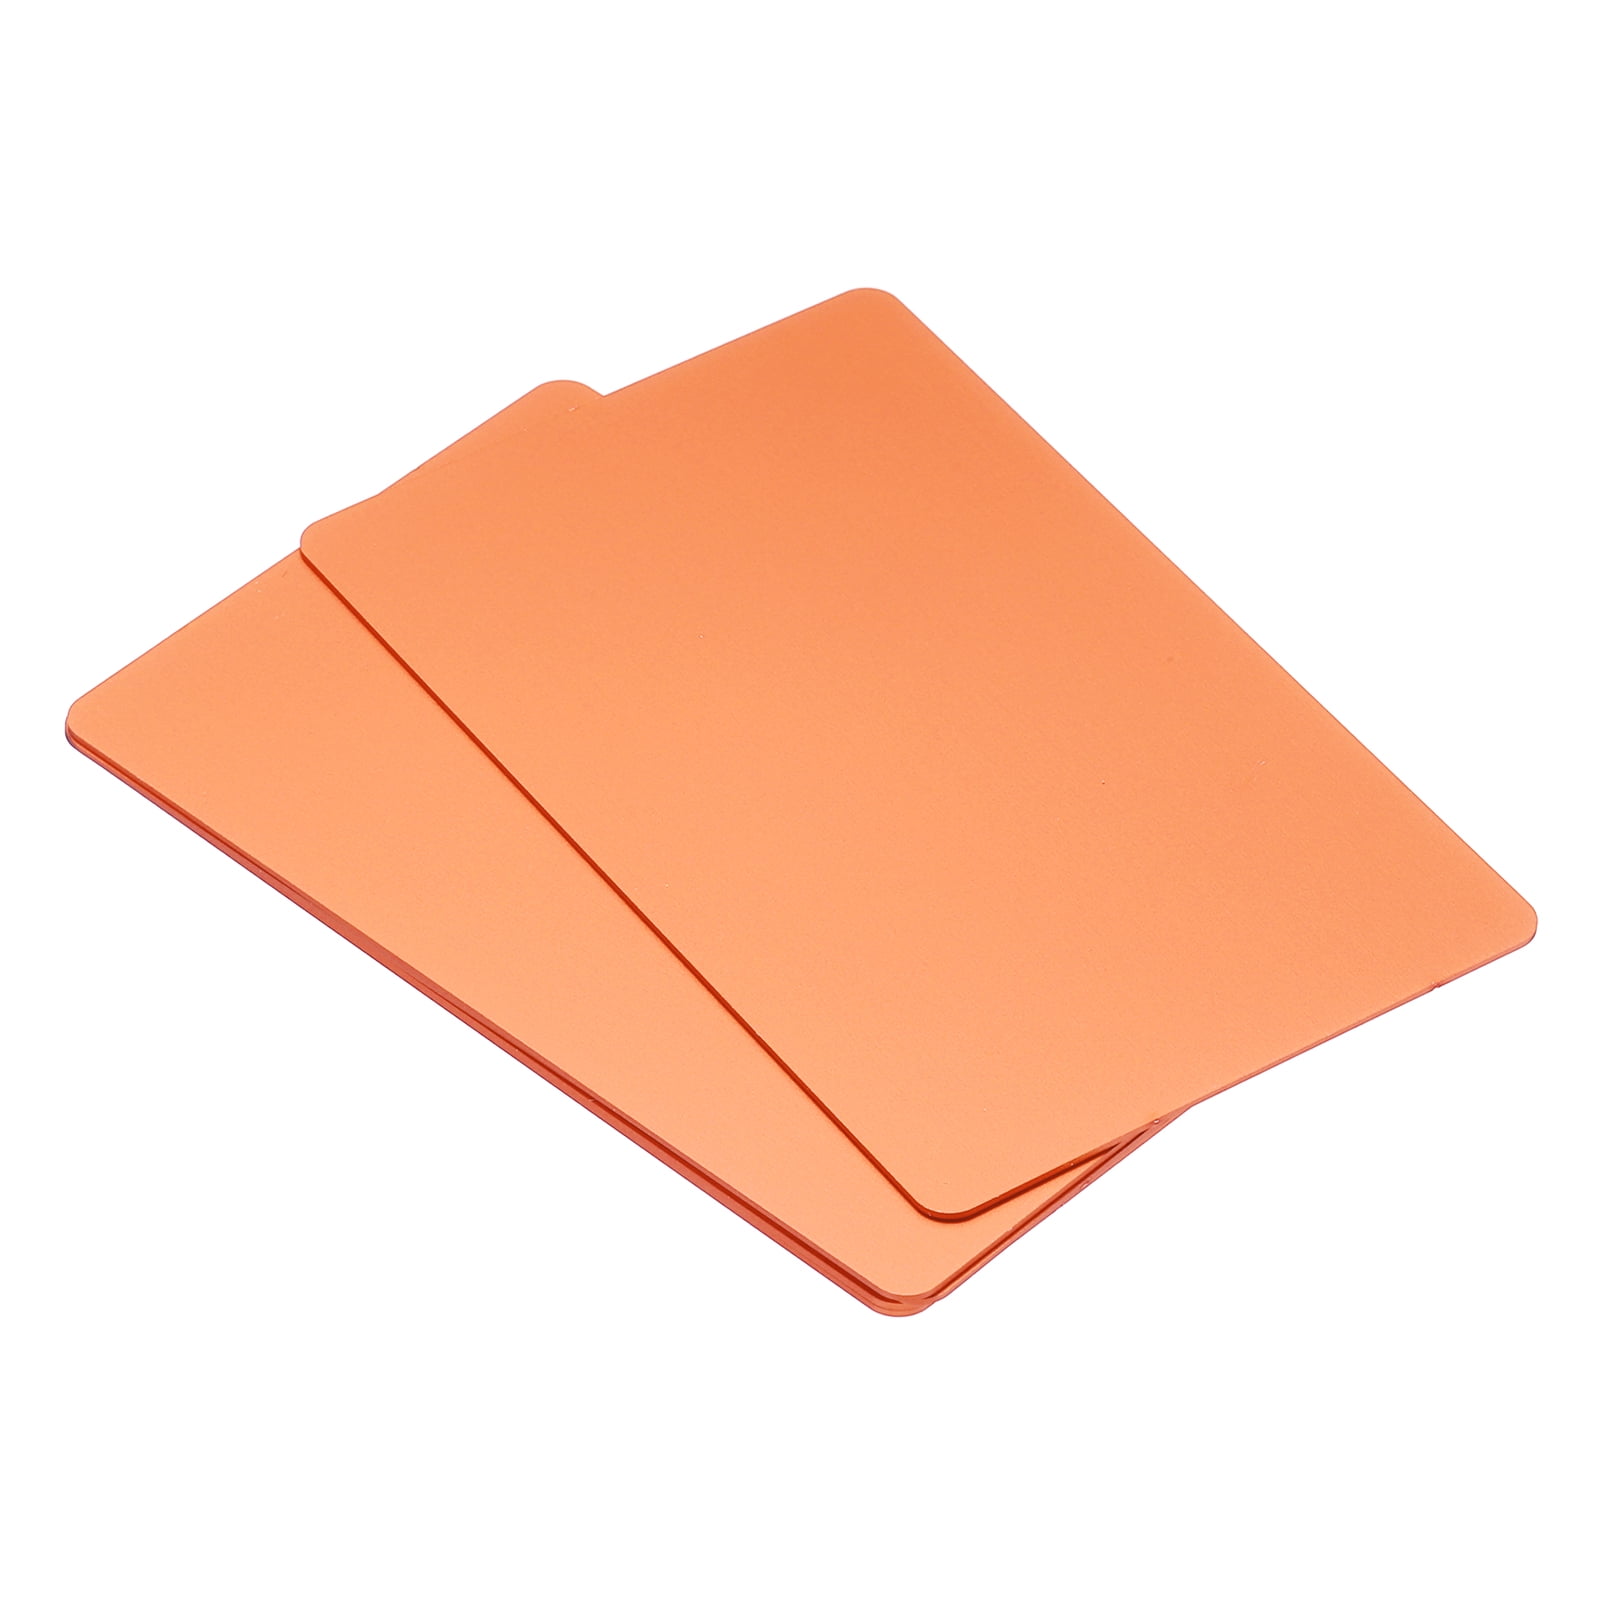 50 Anodized Aluminum Business Card Blanks Metal Business 